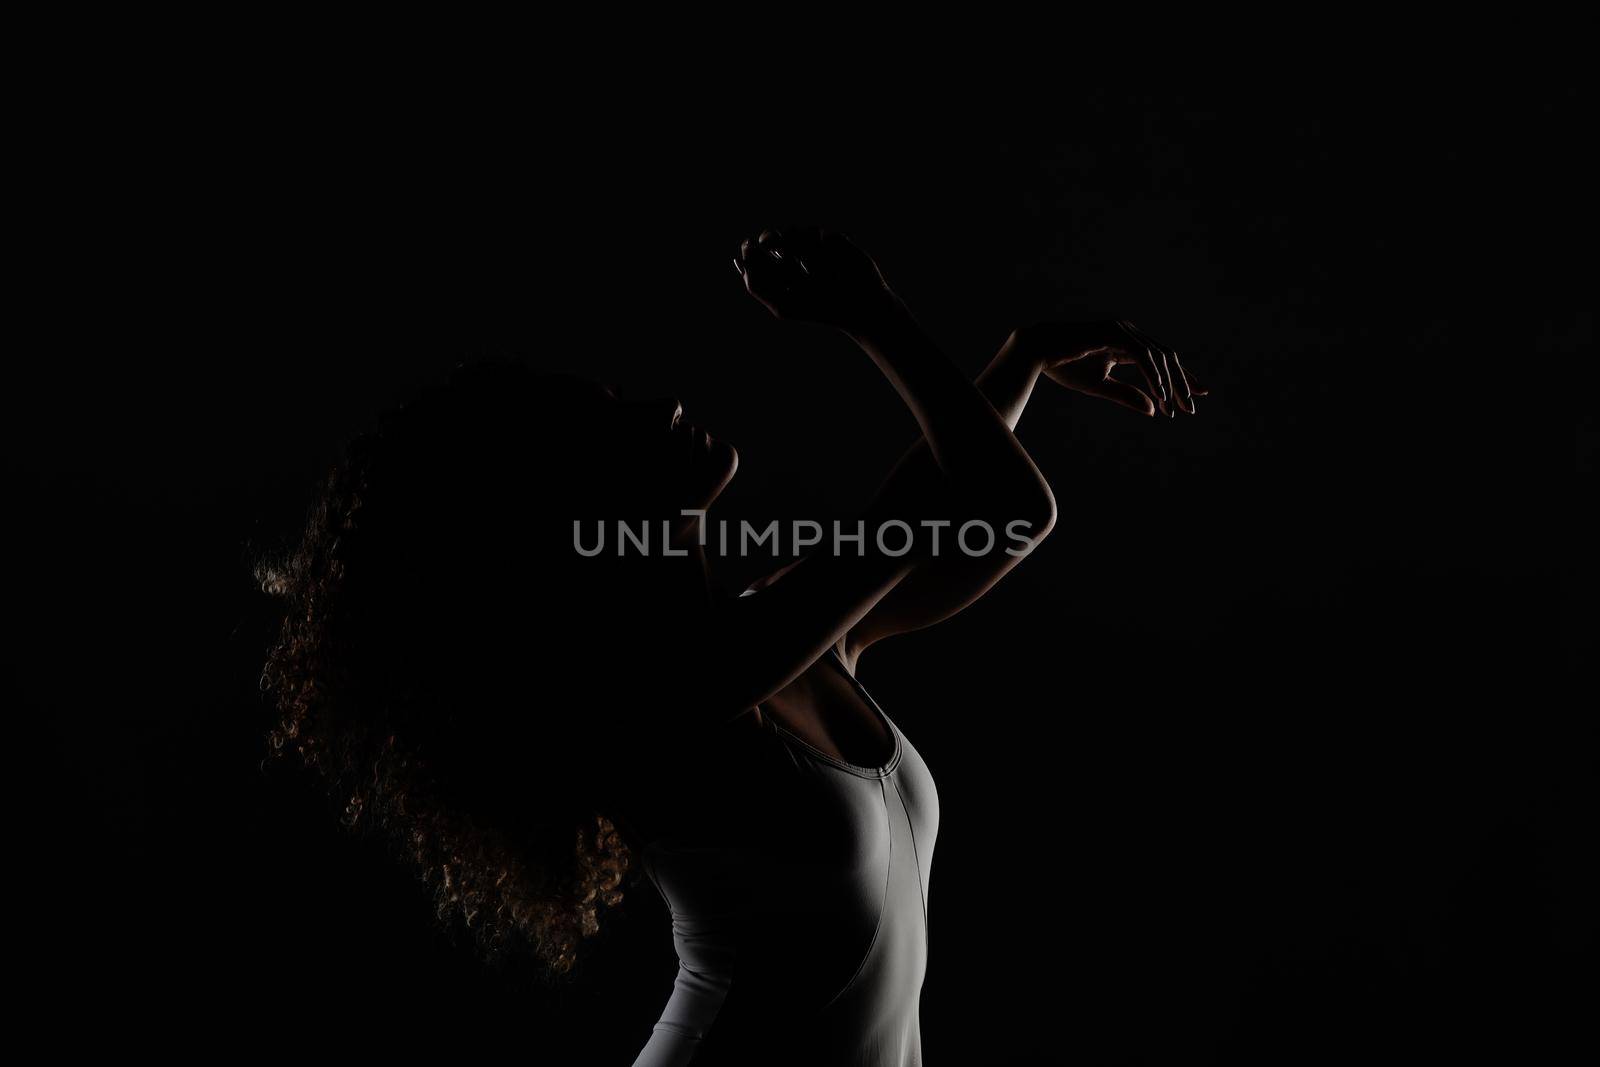 Girl with curly hair making ballet poses. Side lit silhouette of ballerina in white dress against black background. by kokimk